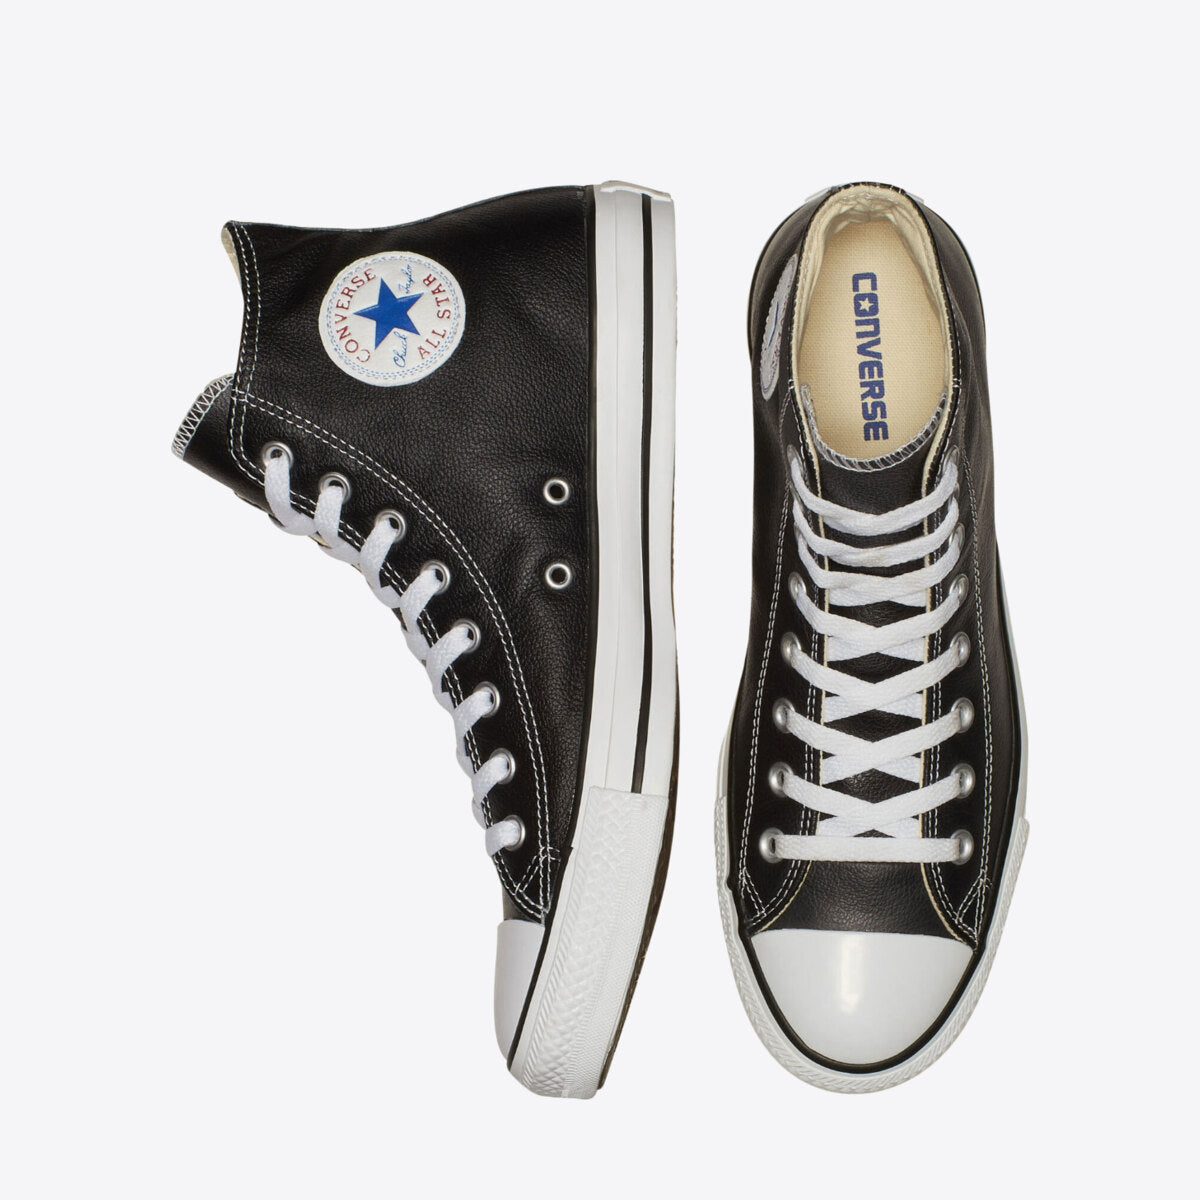 CONVERSE Chuck Taylor All Star Leather High Black - Image 6